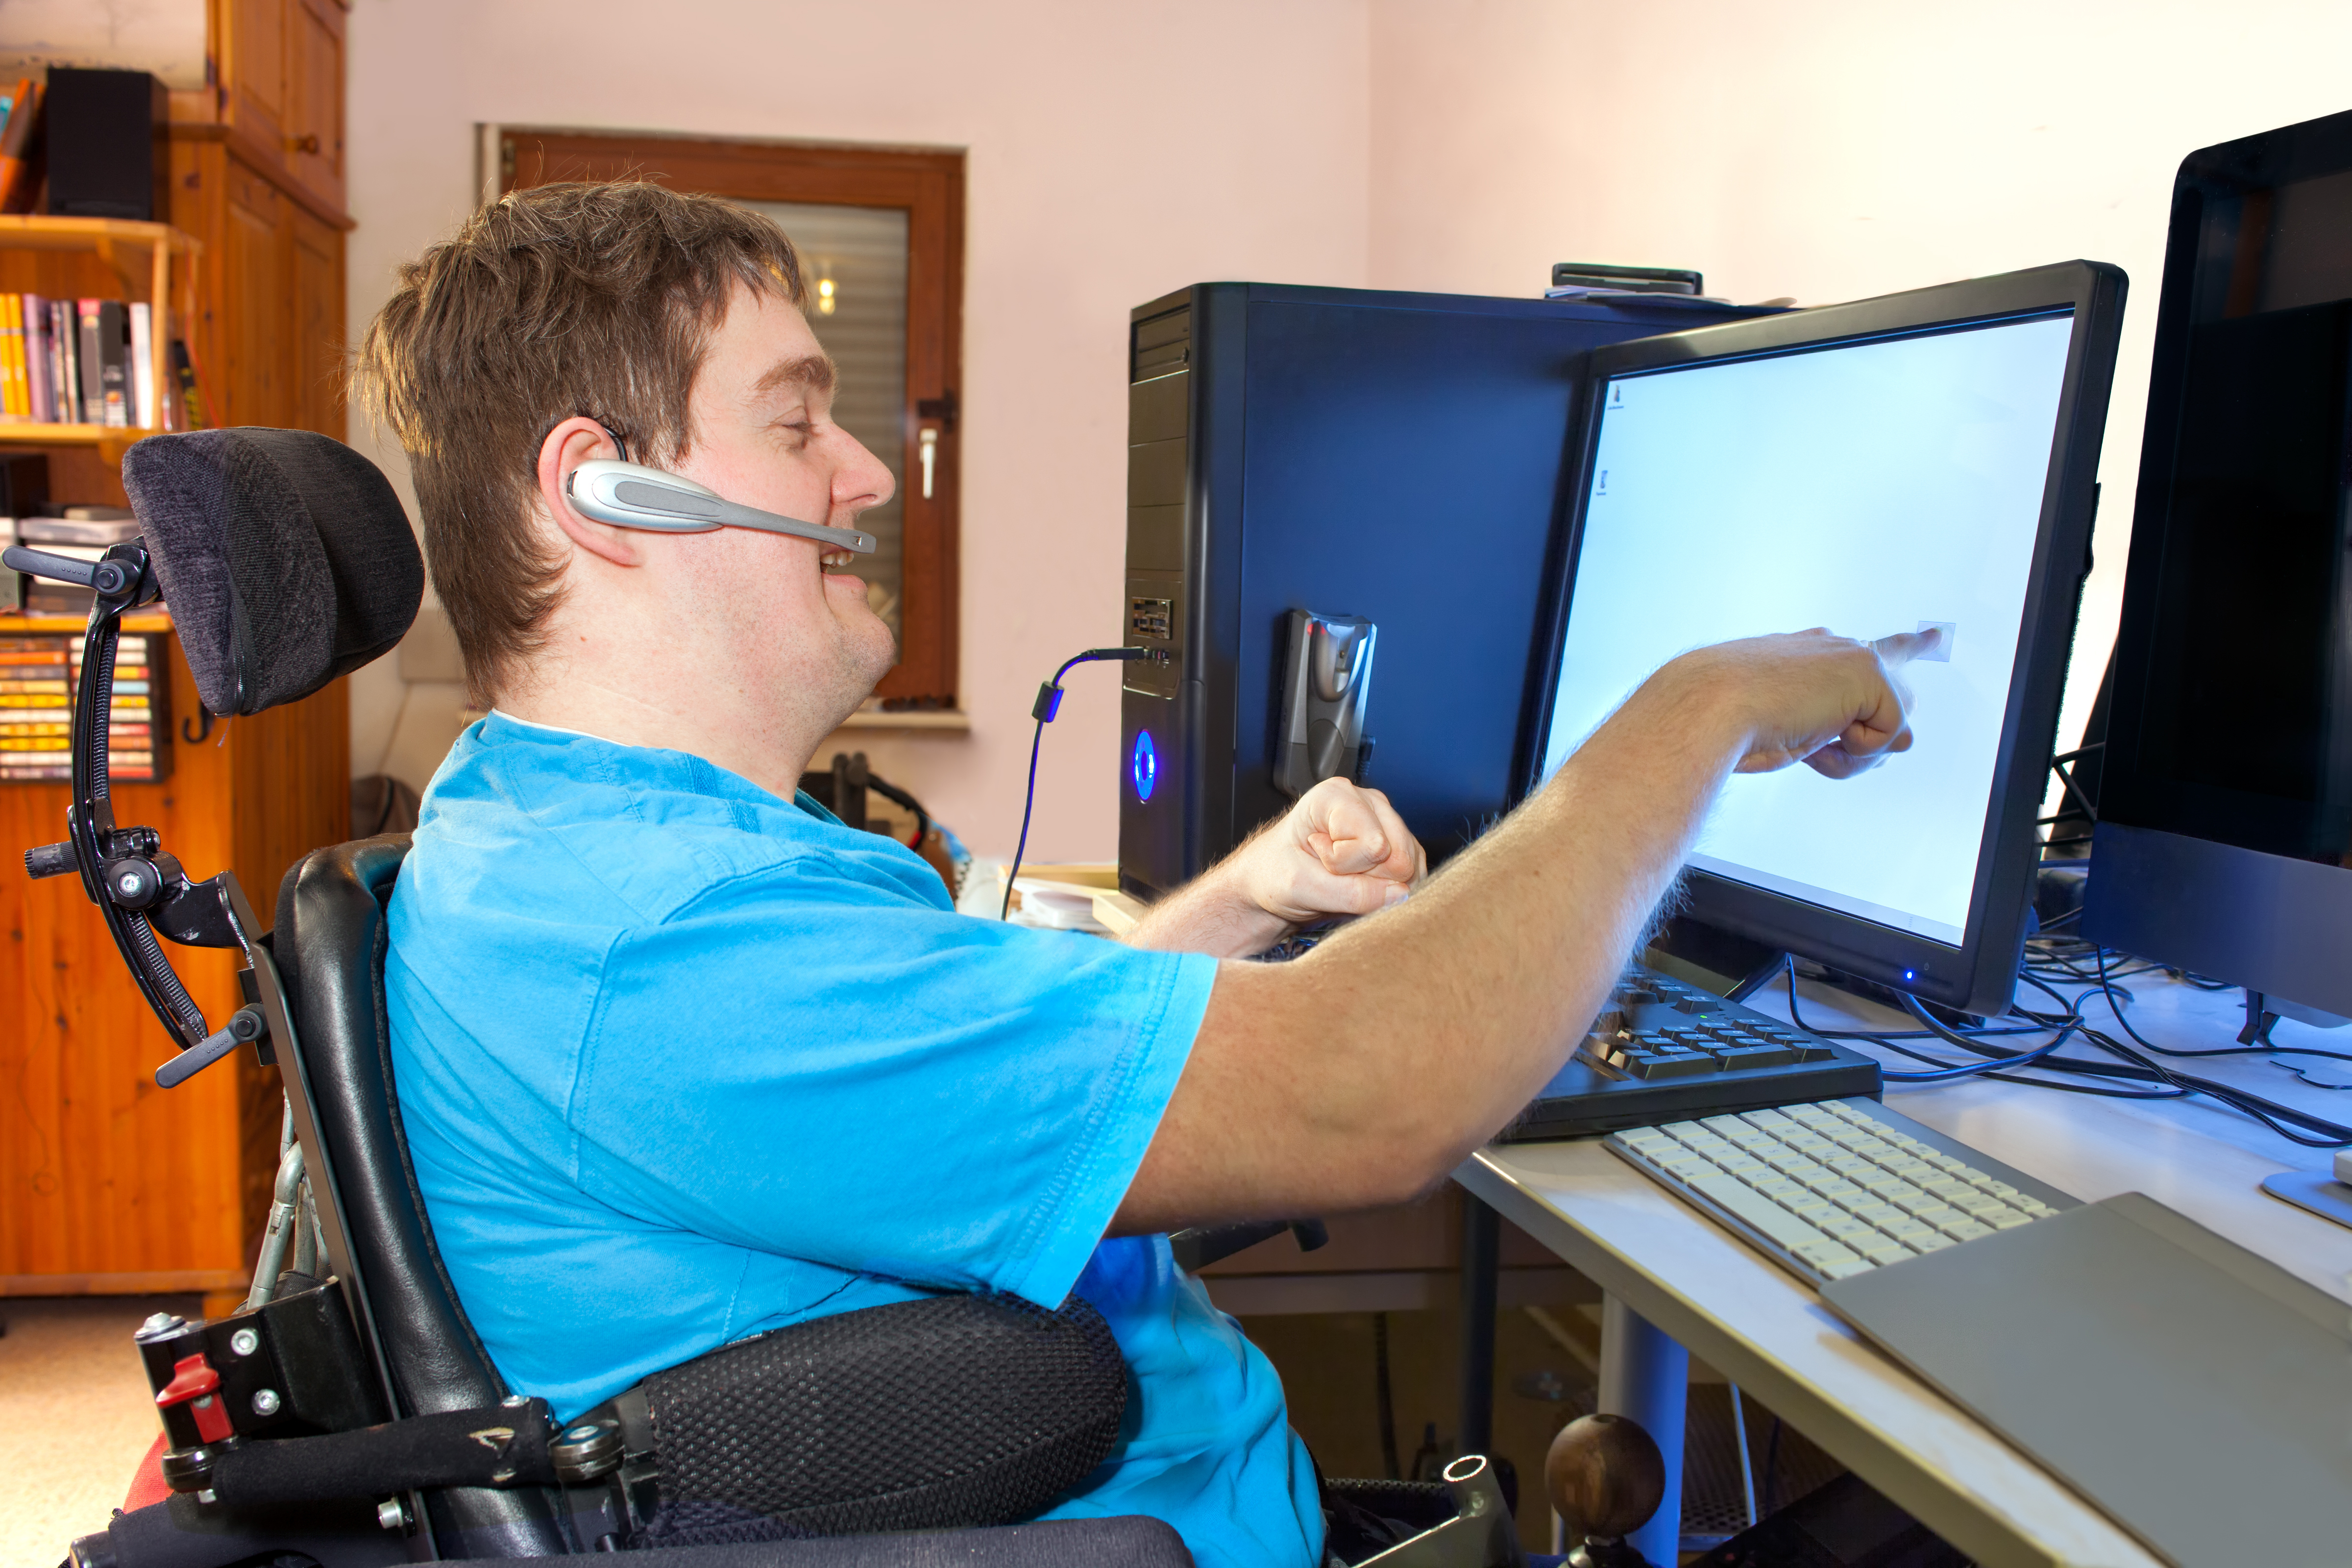 Man in wheelchair using a computer with an assistive touch screen and a headset microphone